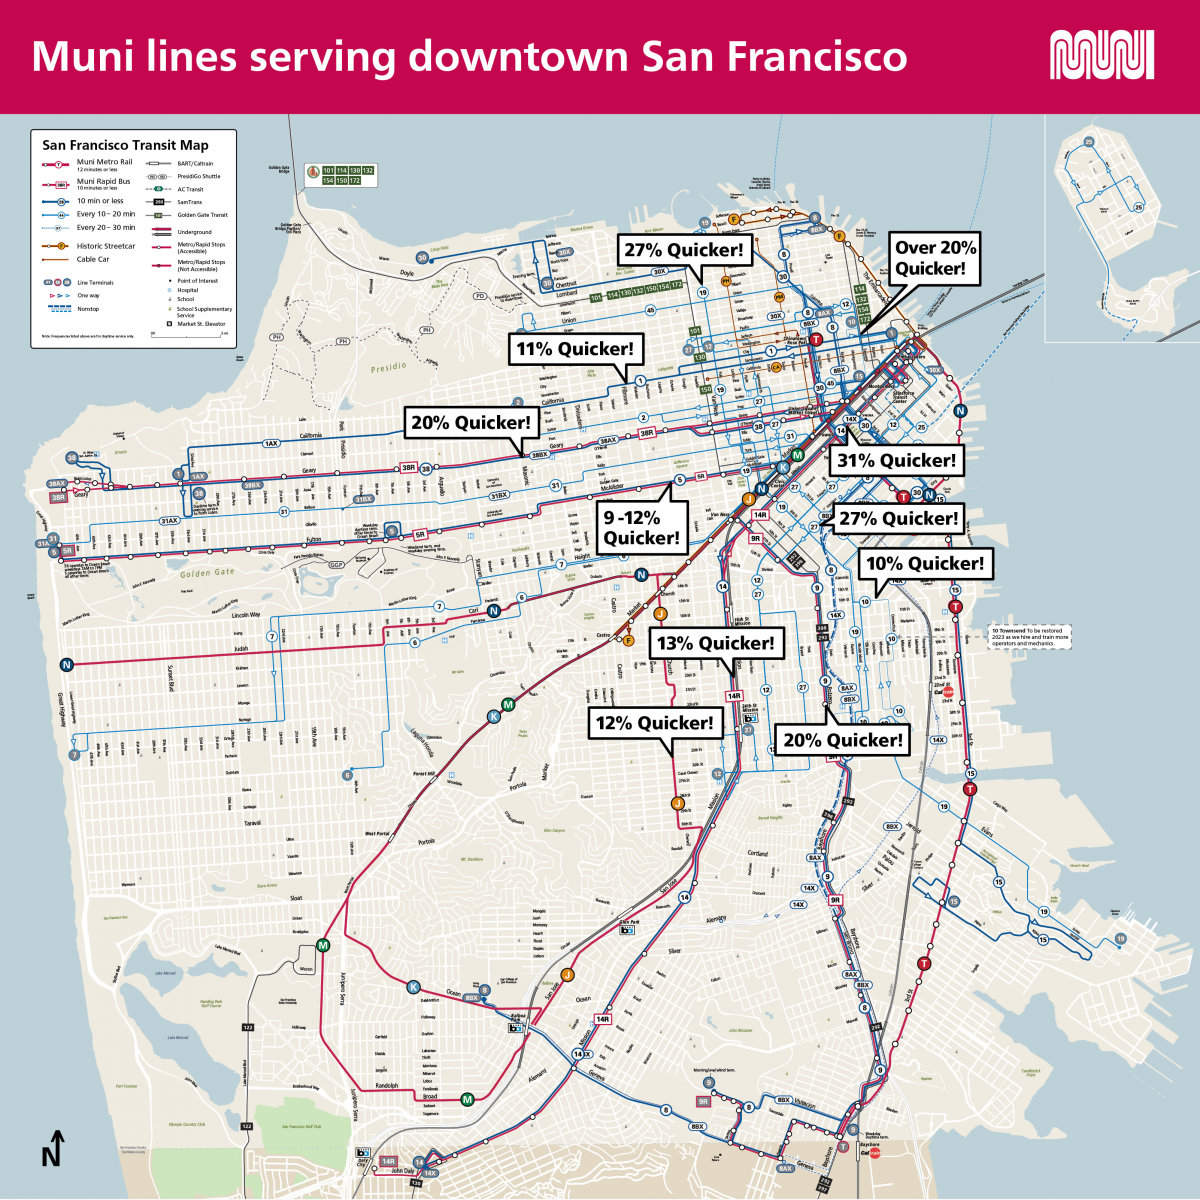 Map of Muni lines that go downtown including F Market Wharves, J Church, K Ingleside, M Ocean View, N Judah, T Third, 1 California, 2 Sutter, 5 Fulton/5R Fulton Rapid, 6 Haight/Parnassus, 7 Haight, 8 Bayshore, 8AX and 8BX Bayshore Expresses, 9 San Bruno/9R San Bruno Rapid, 12 Folsom/Pacific, 14 Mission/14R Mission Rapid, 15 Bayview Hunters Point Express, 19 Polk, 25 Treasure Island, 27 Bryant, 30 Stockton, 31 Balboa, 38 Geary/38R Geary Rapid and 45 Union/Stockton.